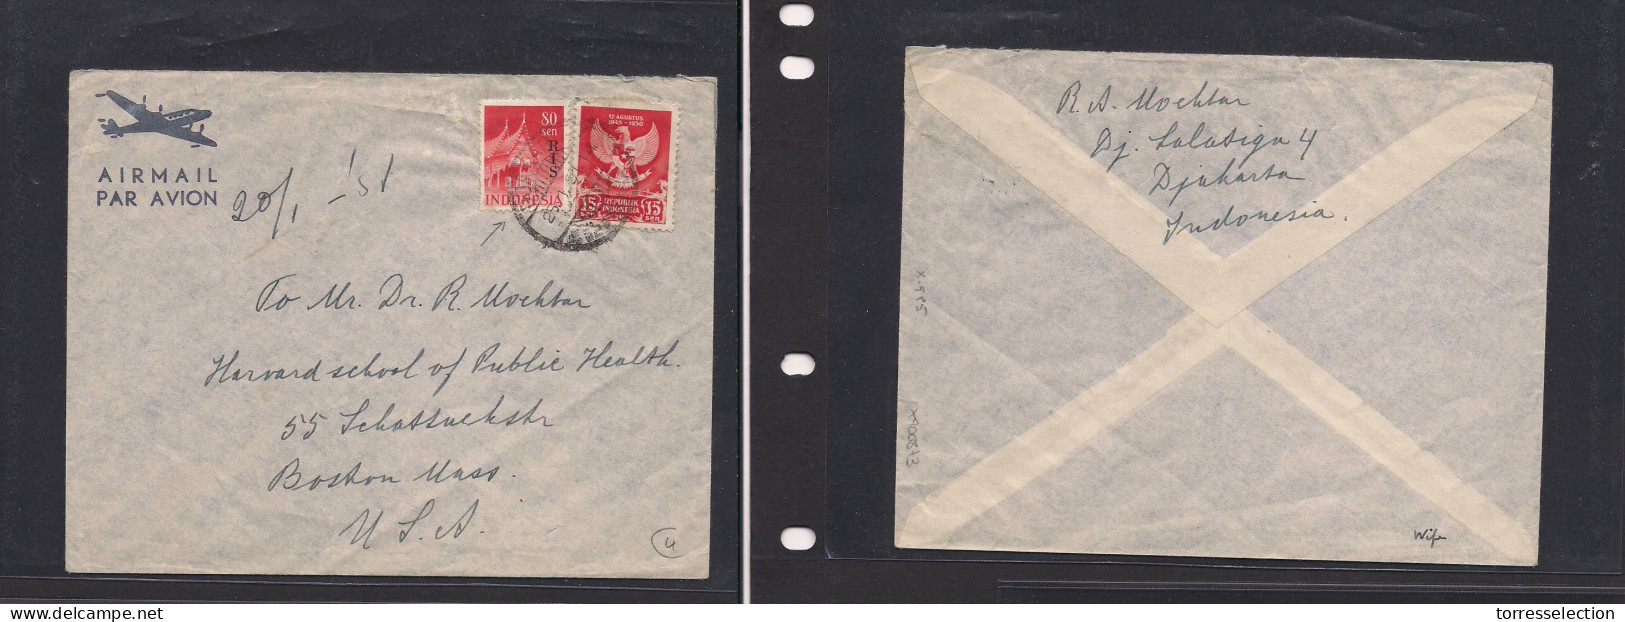 DUTCH INDIES. Dutch Indies - Cover - Indonesia RIS 1951 Djakarta To USA Boston. Easy Deal. - Indonesia